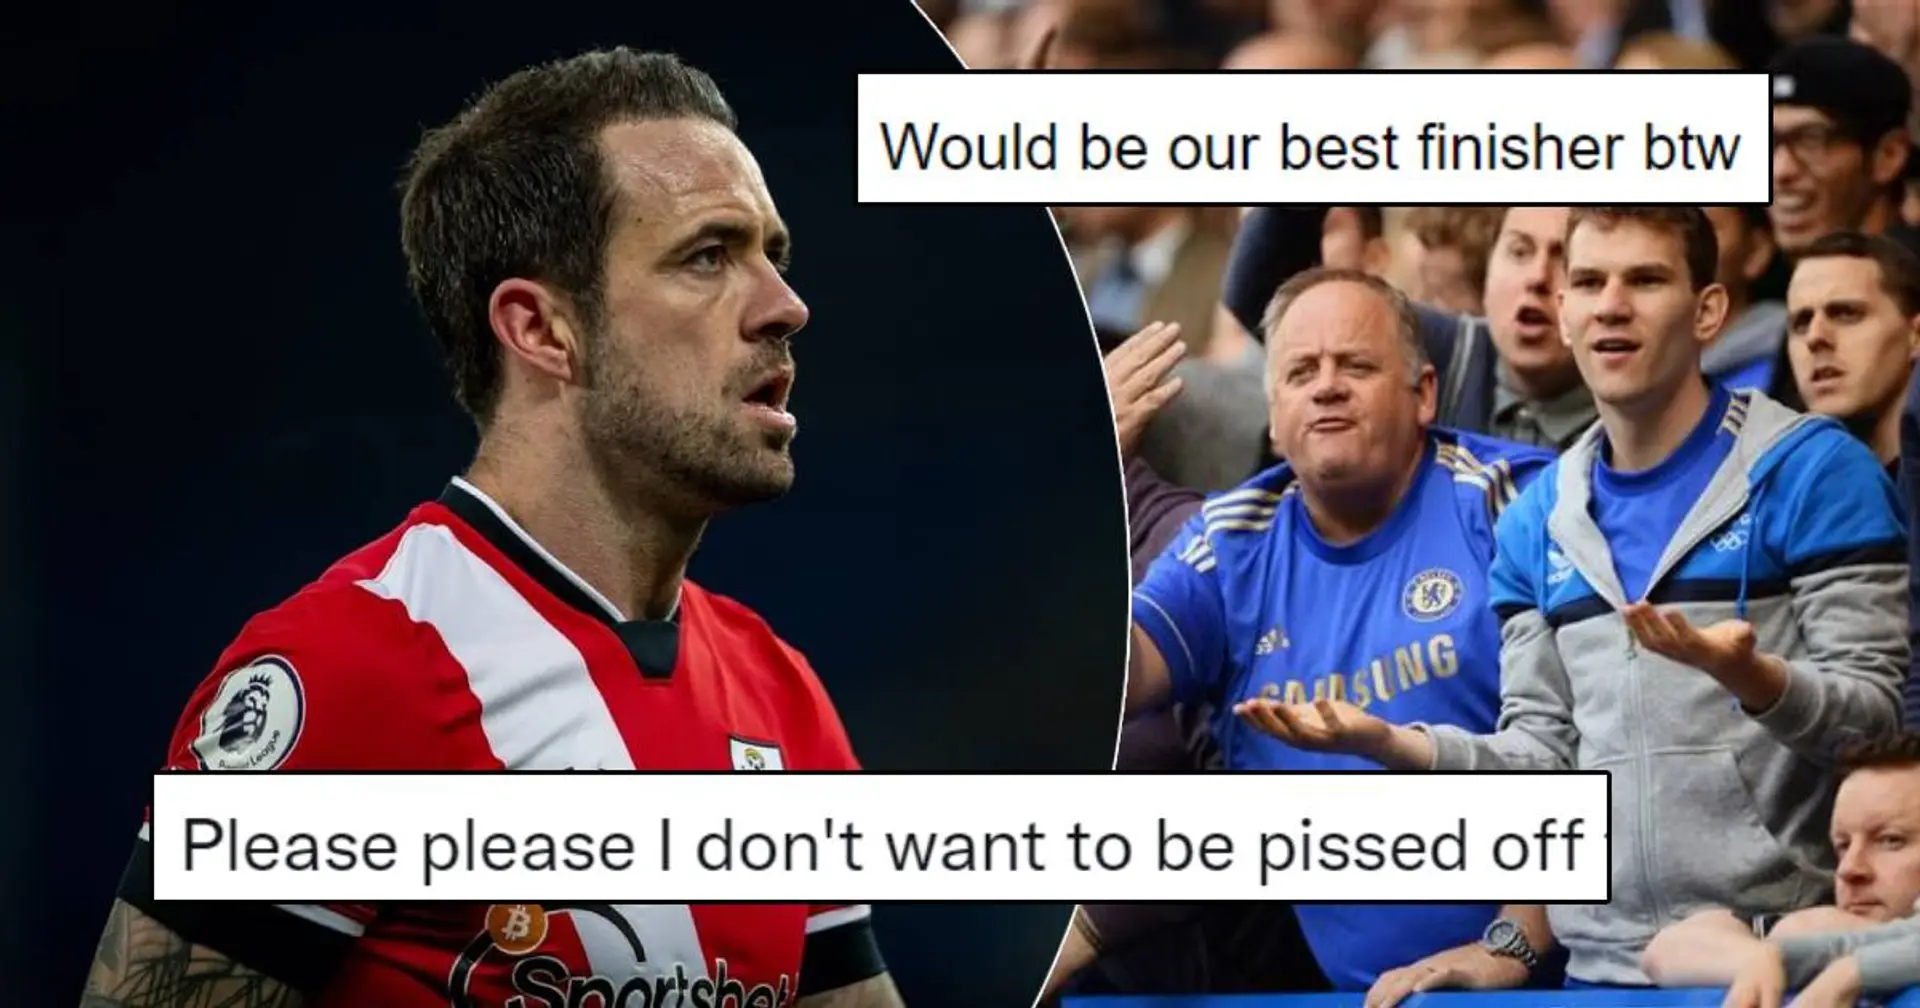 'We want signings, not sign Ings': Chelsea fans react to rumours of club wanting to get Southampton striker